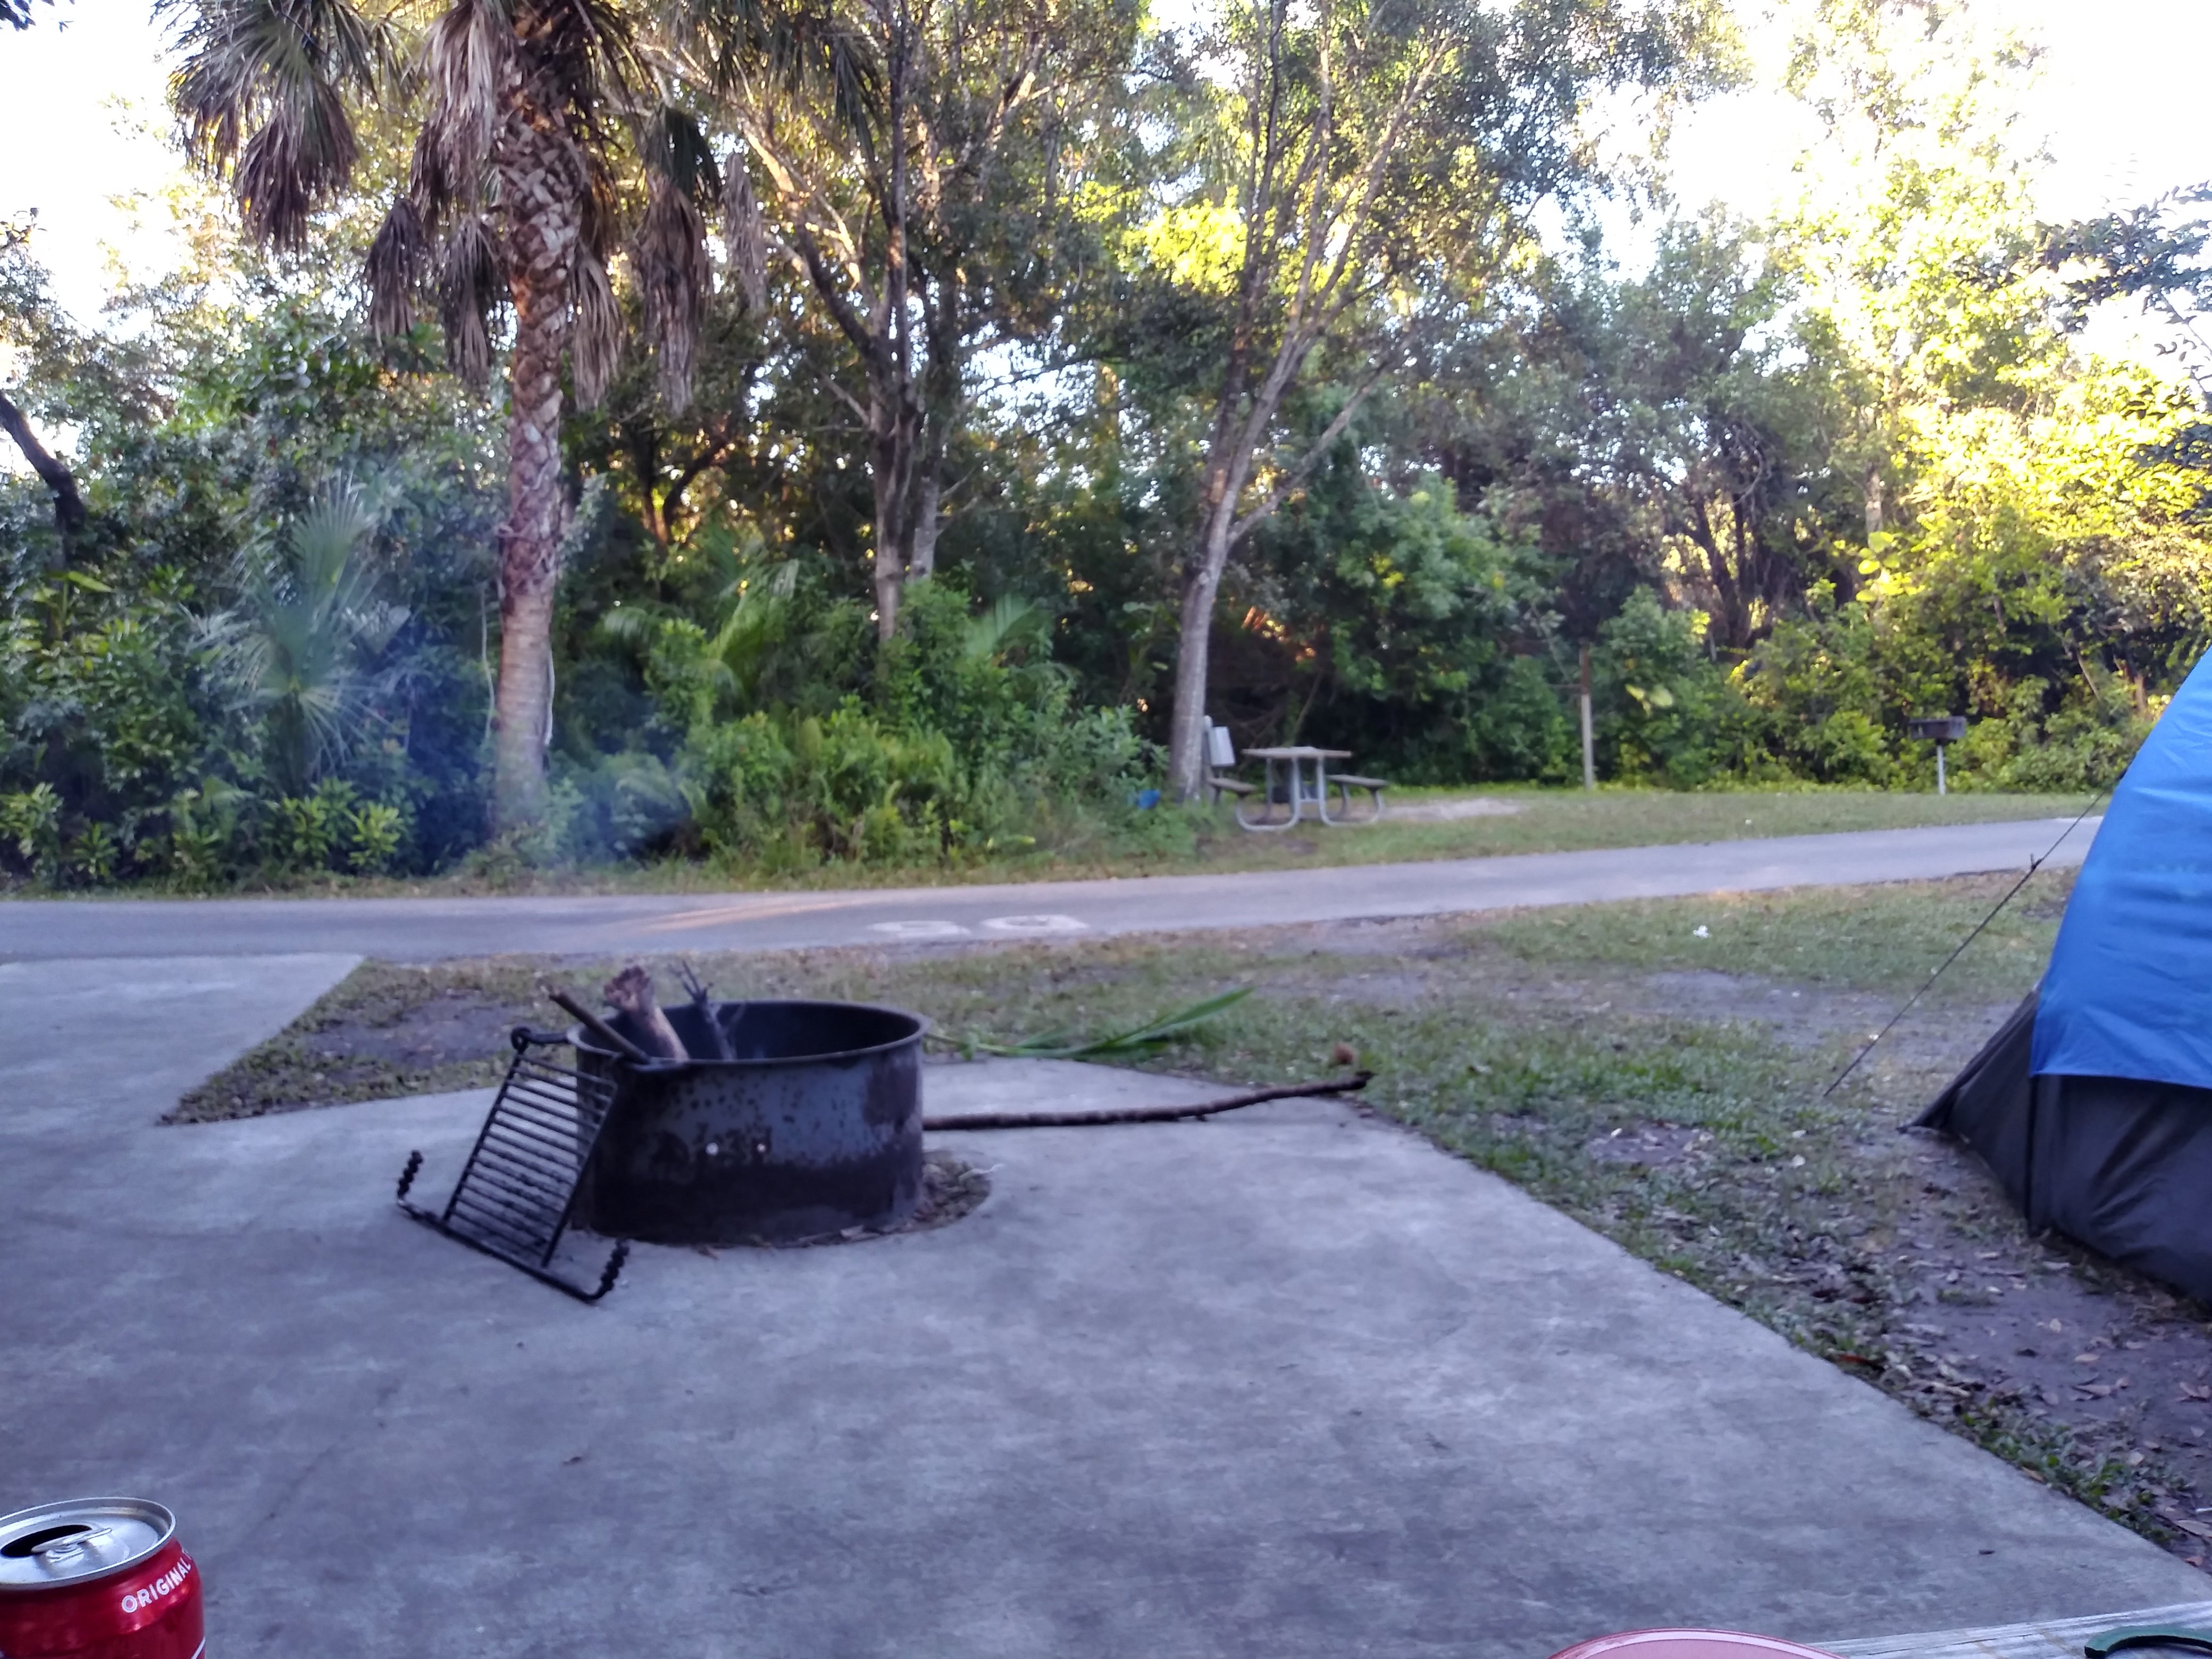 Camper submitted image from Easterlin Park Campground - 1